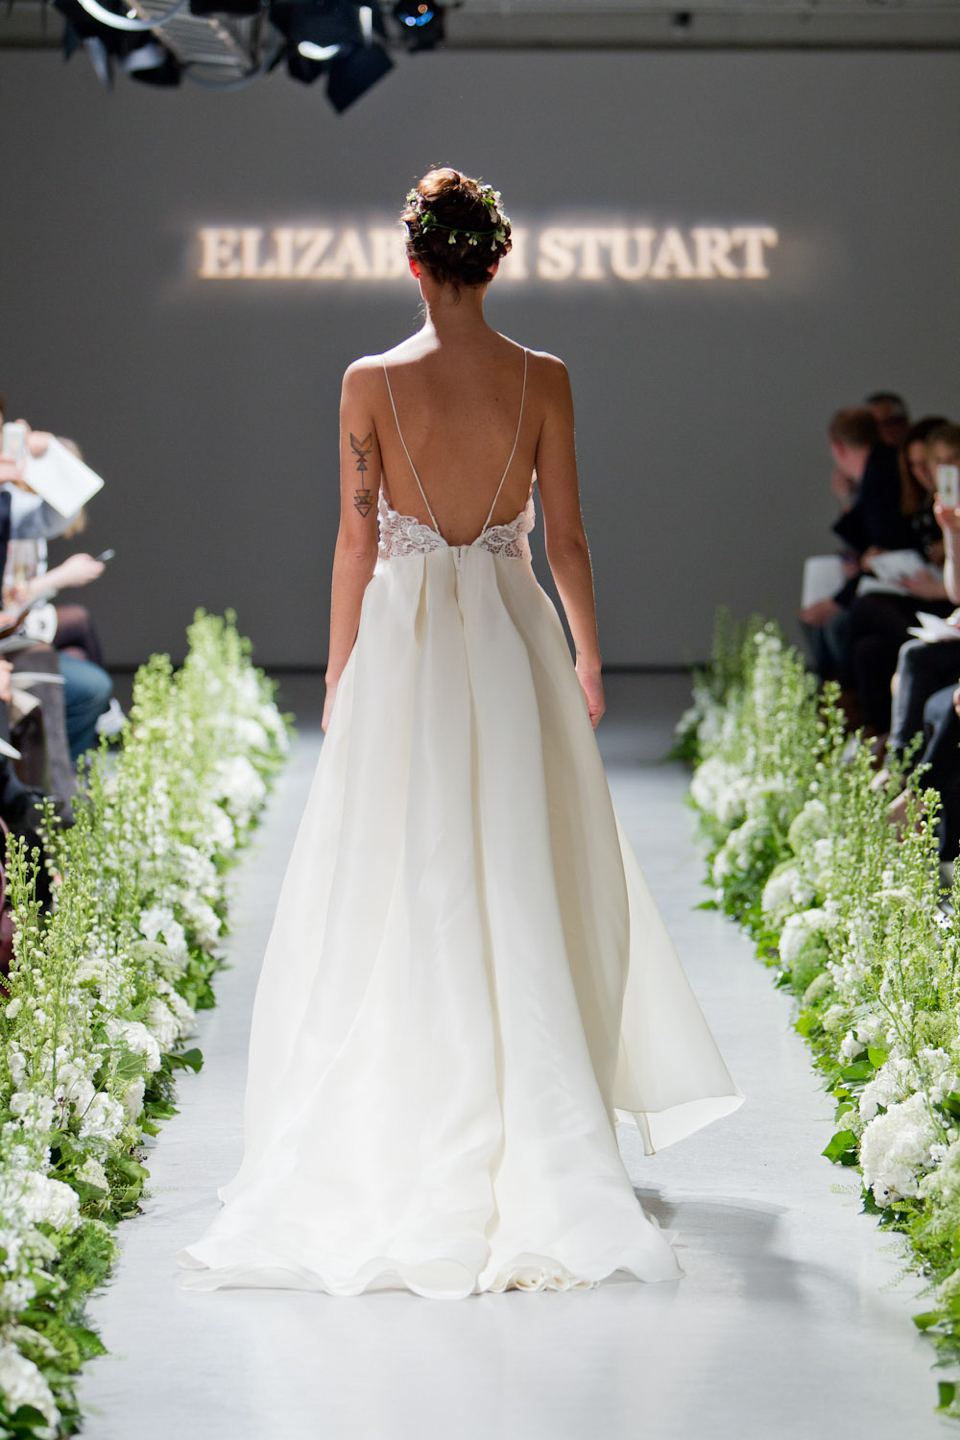 Elizabeth Stuart 'The Enchantment of The Seasons' Autumn/Fall 2014 Bridal Wear Collection // Photography by Catherine Mead